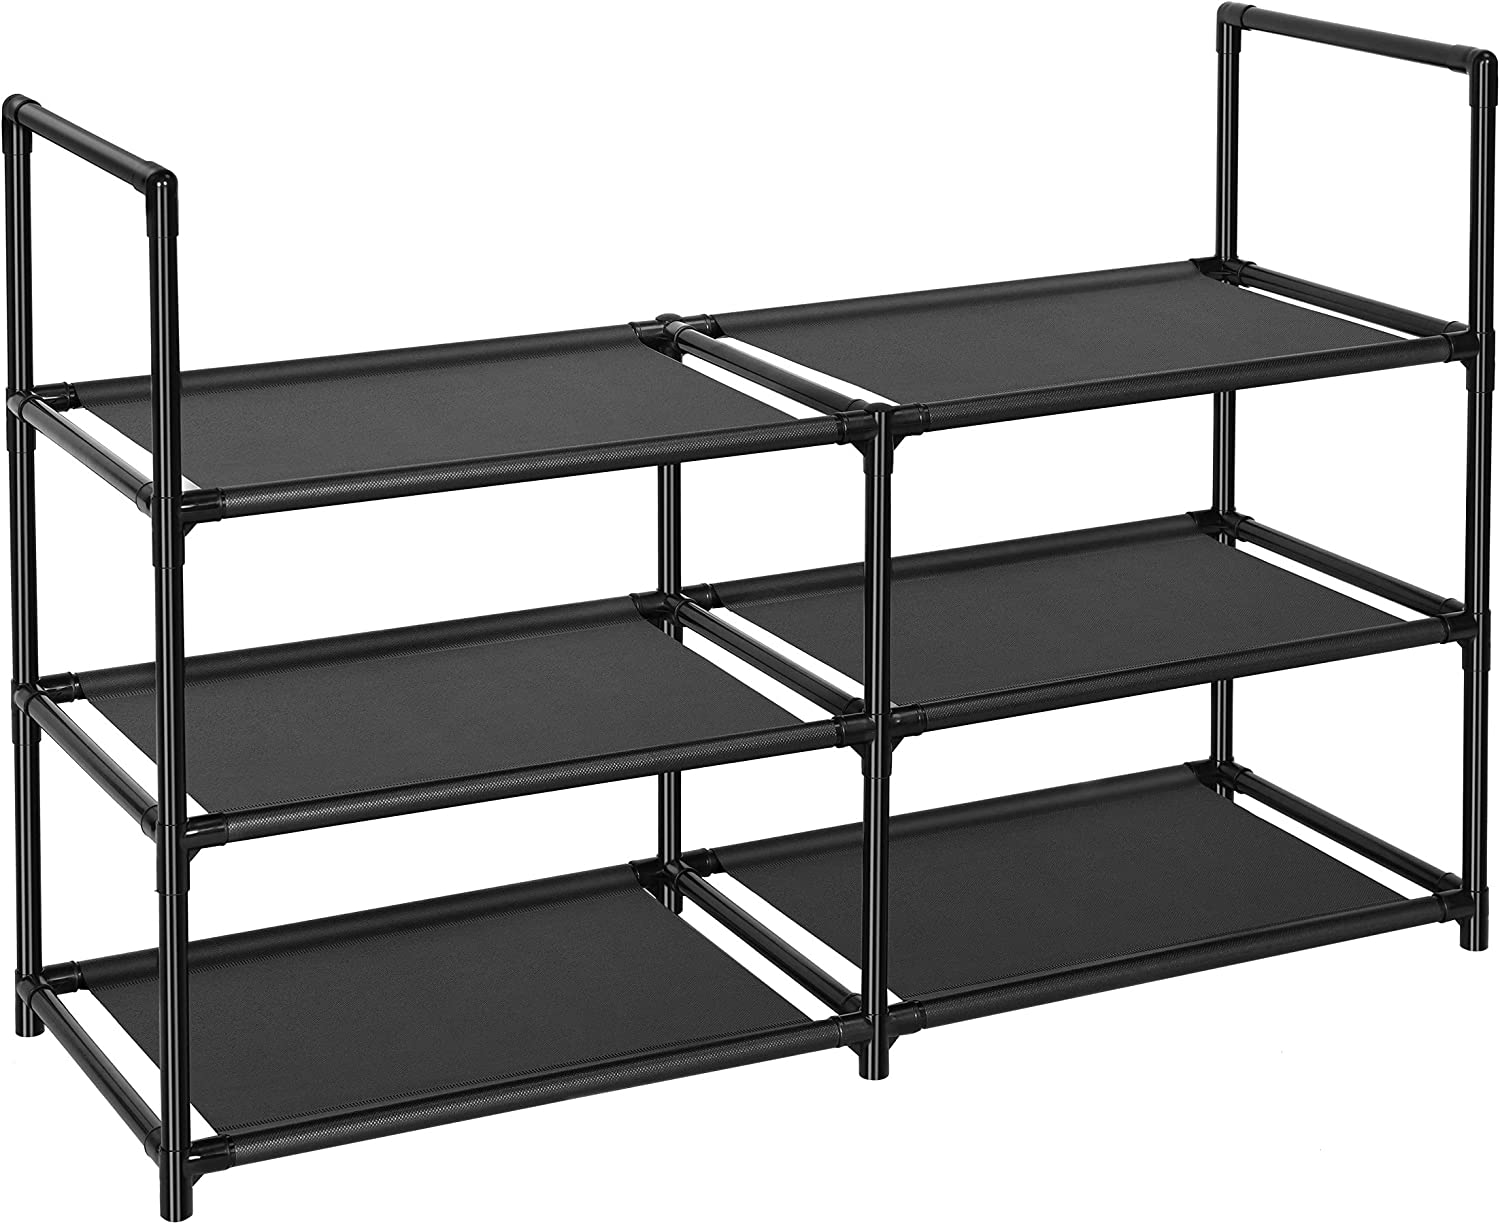 Kitsure 9-Tier Tall Shoe Rack for Closet - Shoe Organizer with Hook Rack,  Large-Capacity of 36-45 Pairs, Shoe Shelf for Entryway, Closet, Black